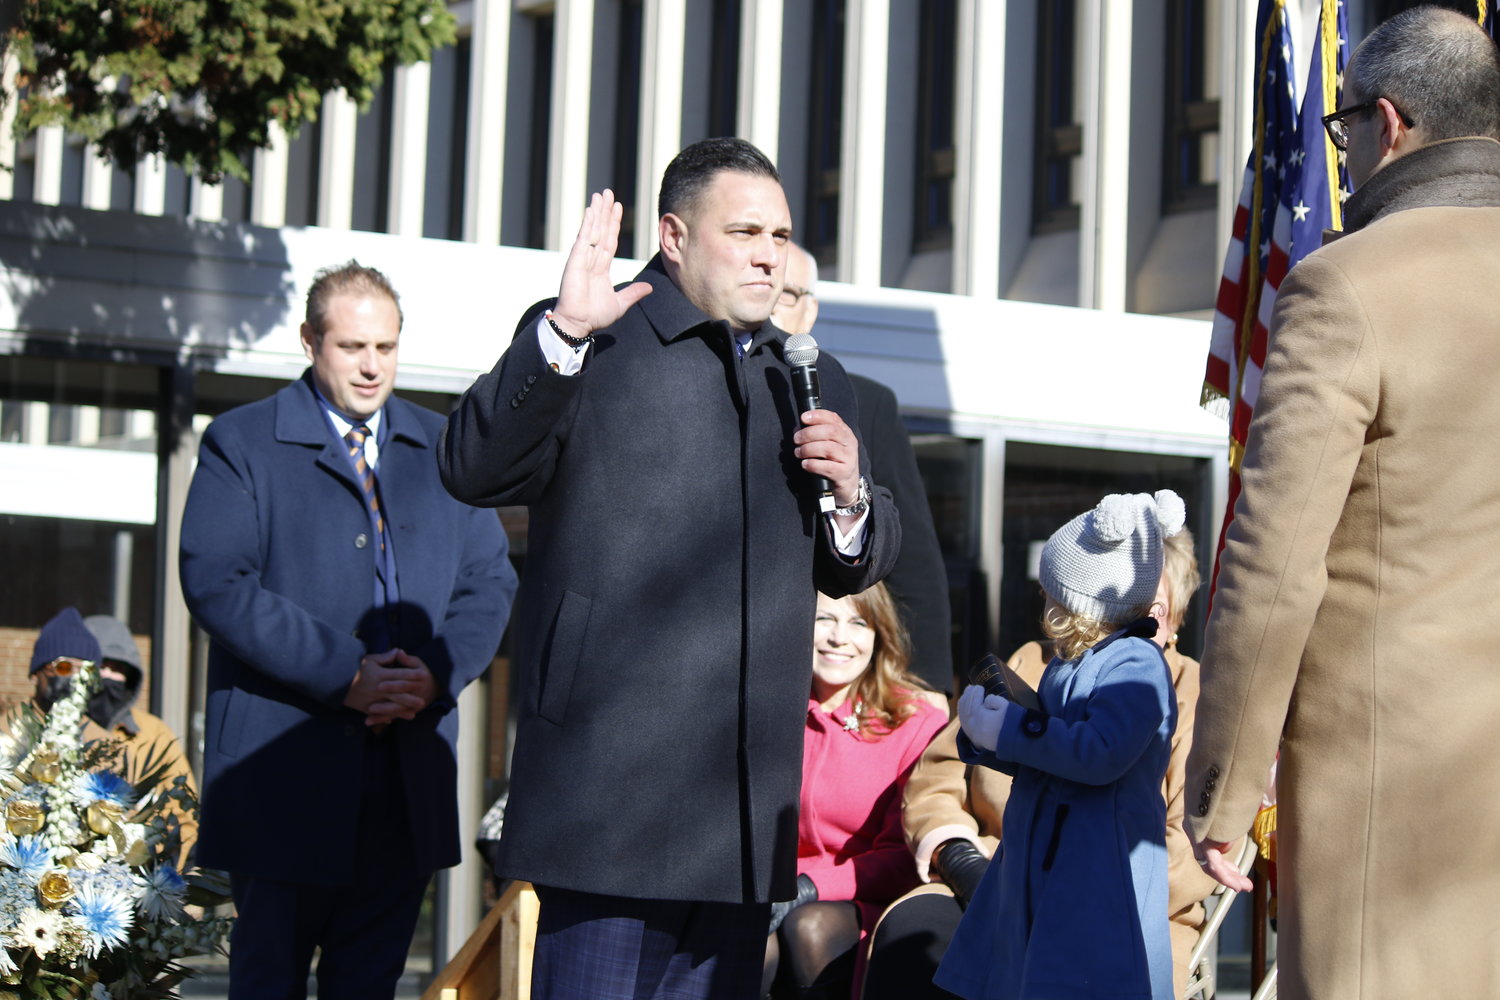 Hempstead Town Councilman Anthony D’Esposito was sworn into office on Jan. 4.